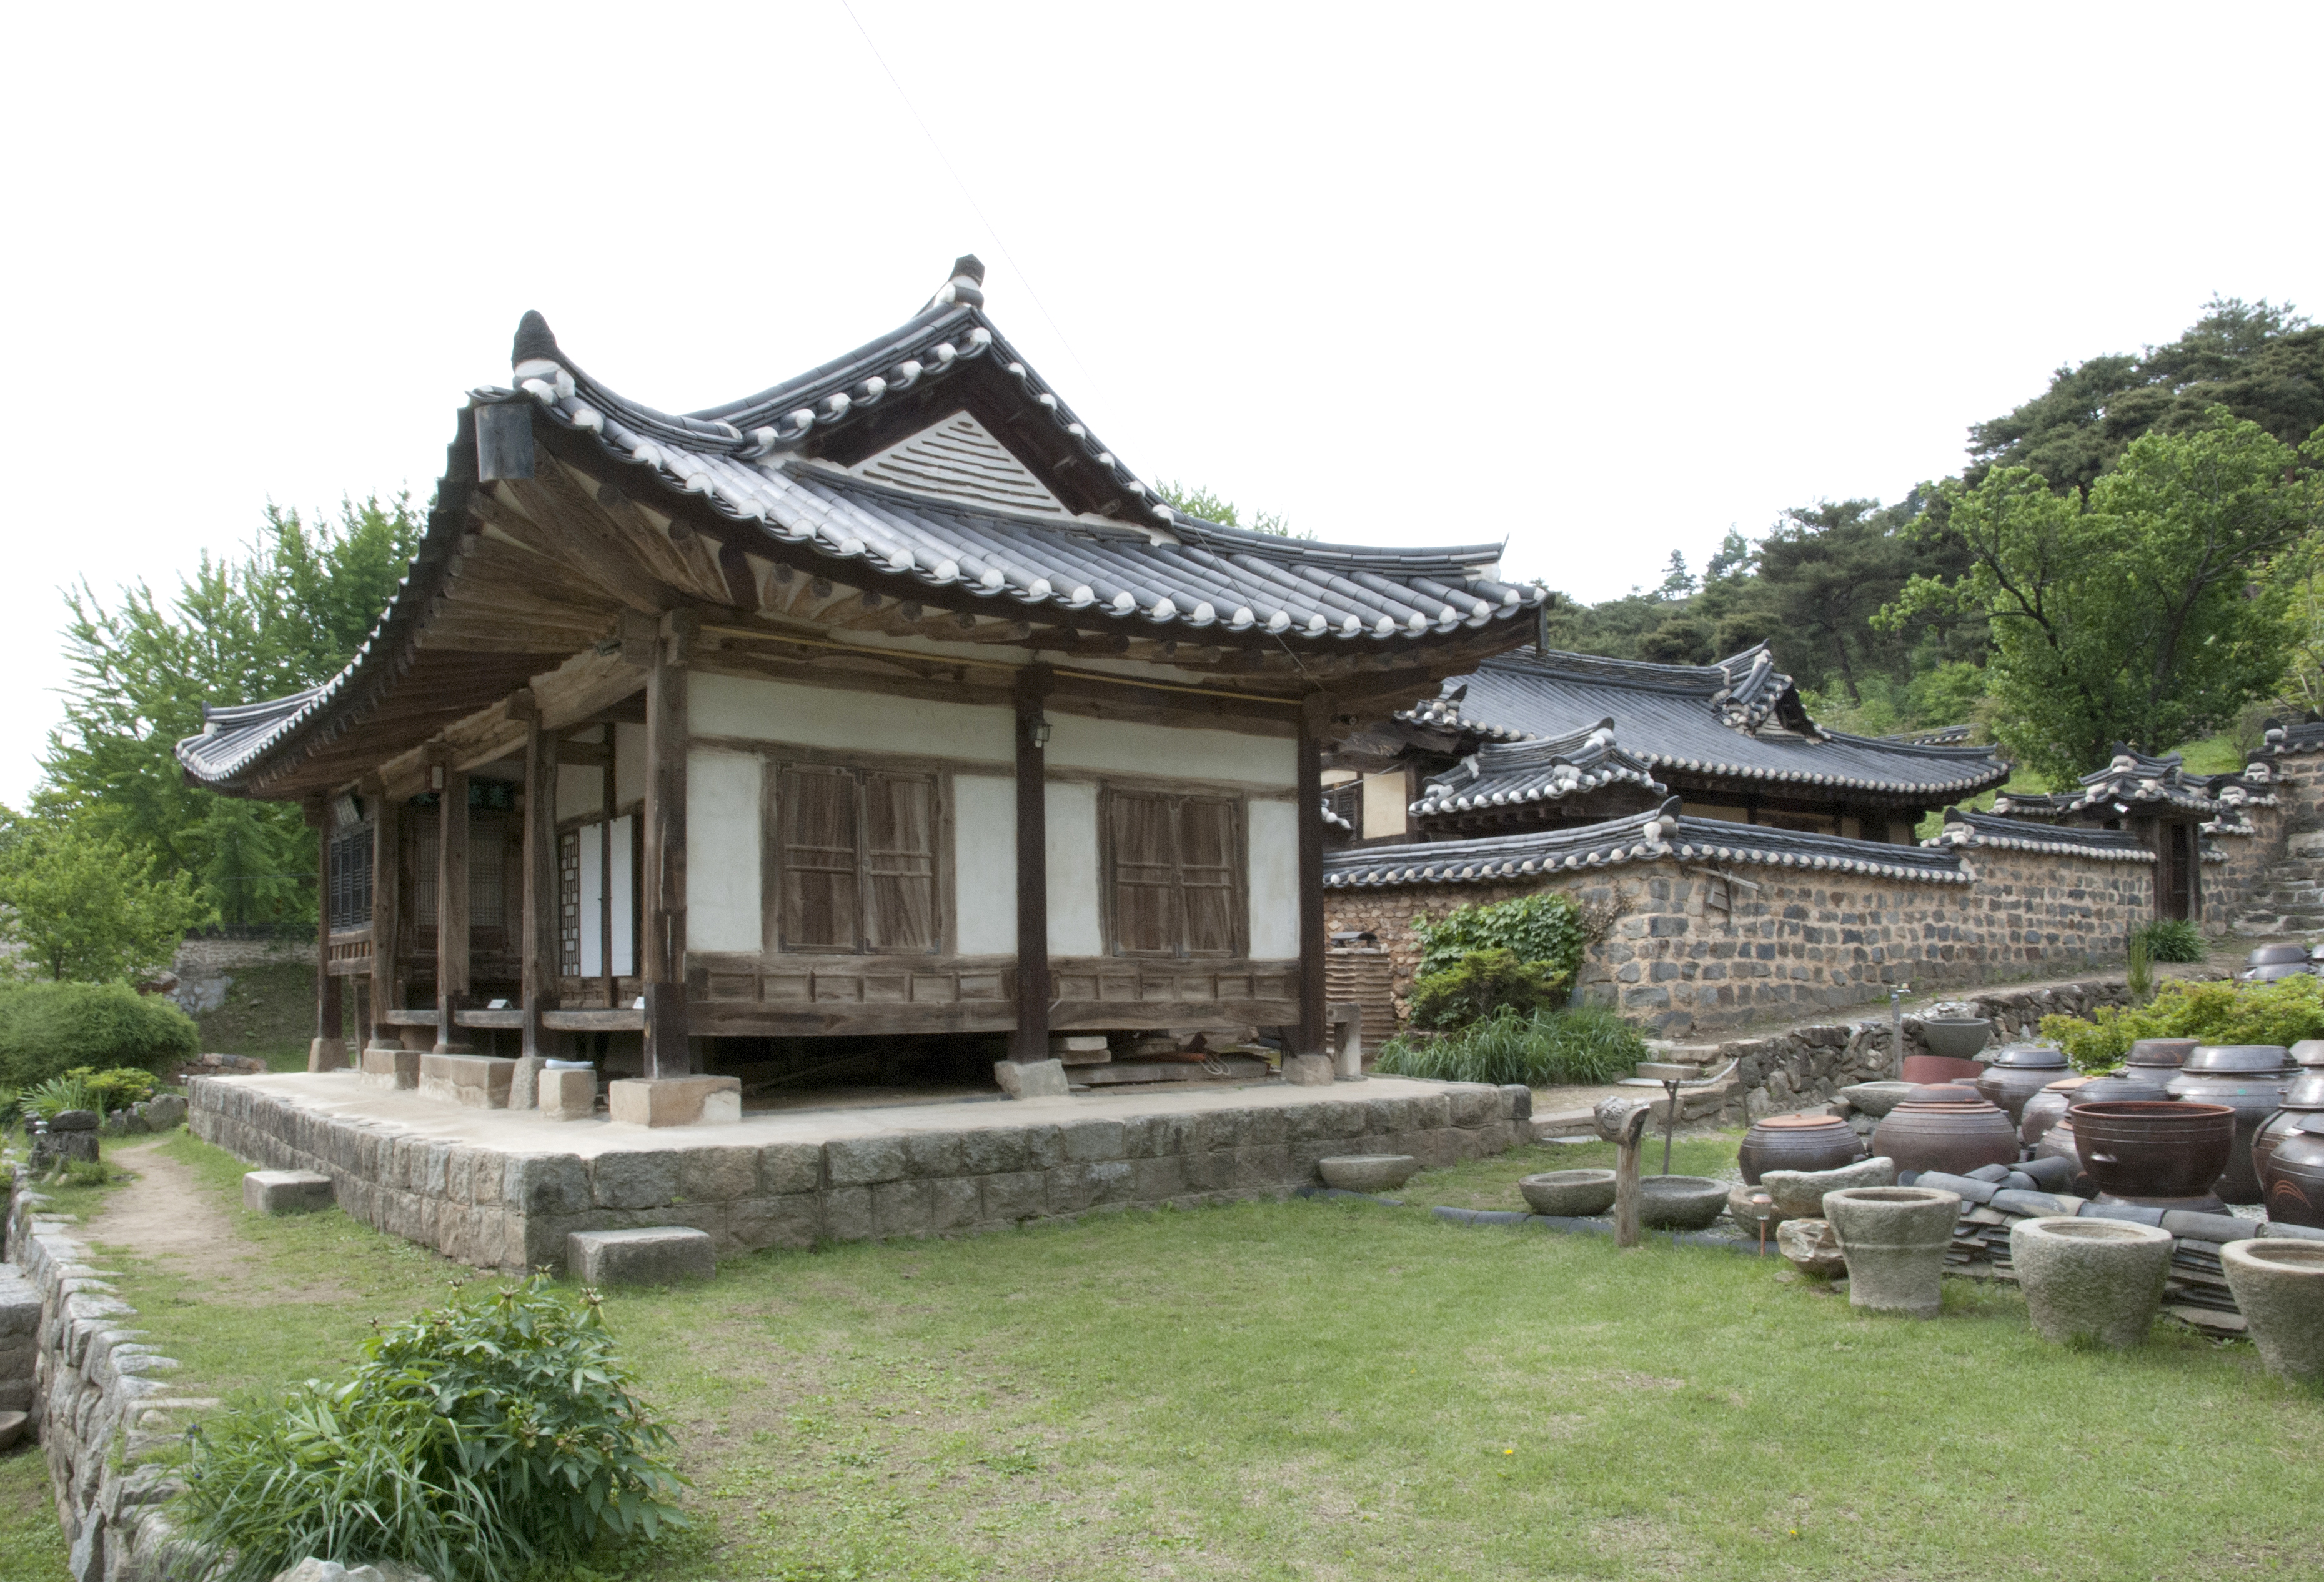 Exterior view of a traditional household in Korea shows gateway to women’s inner quarters on the left and the scholar’s studio on the right. Courtesy of Young-Kyu Park, 2022